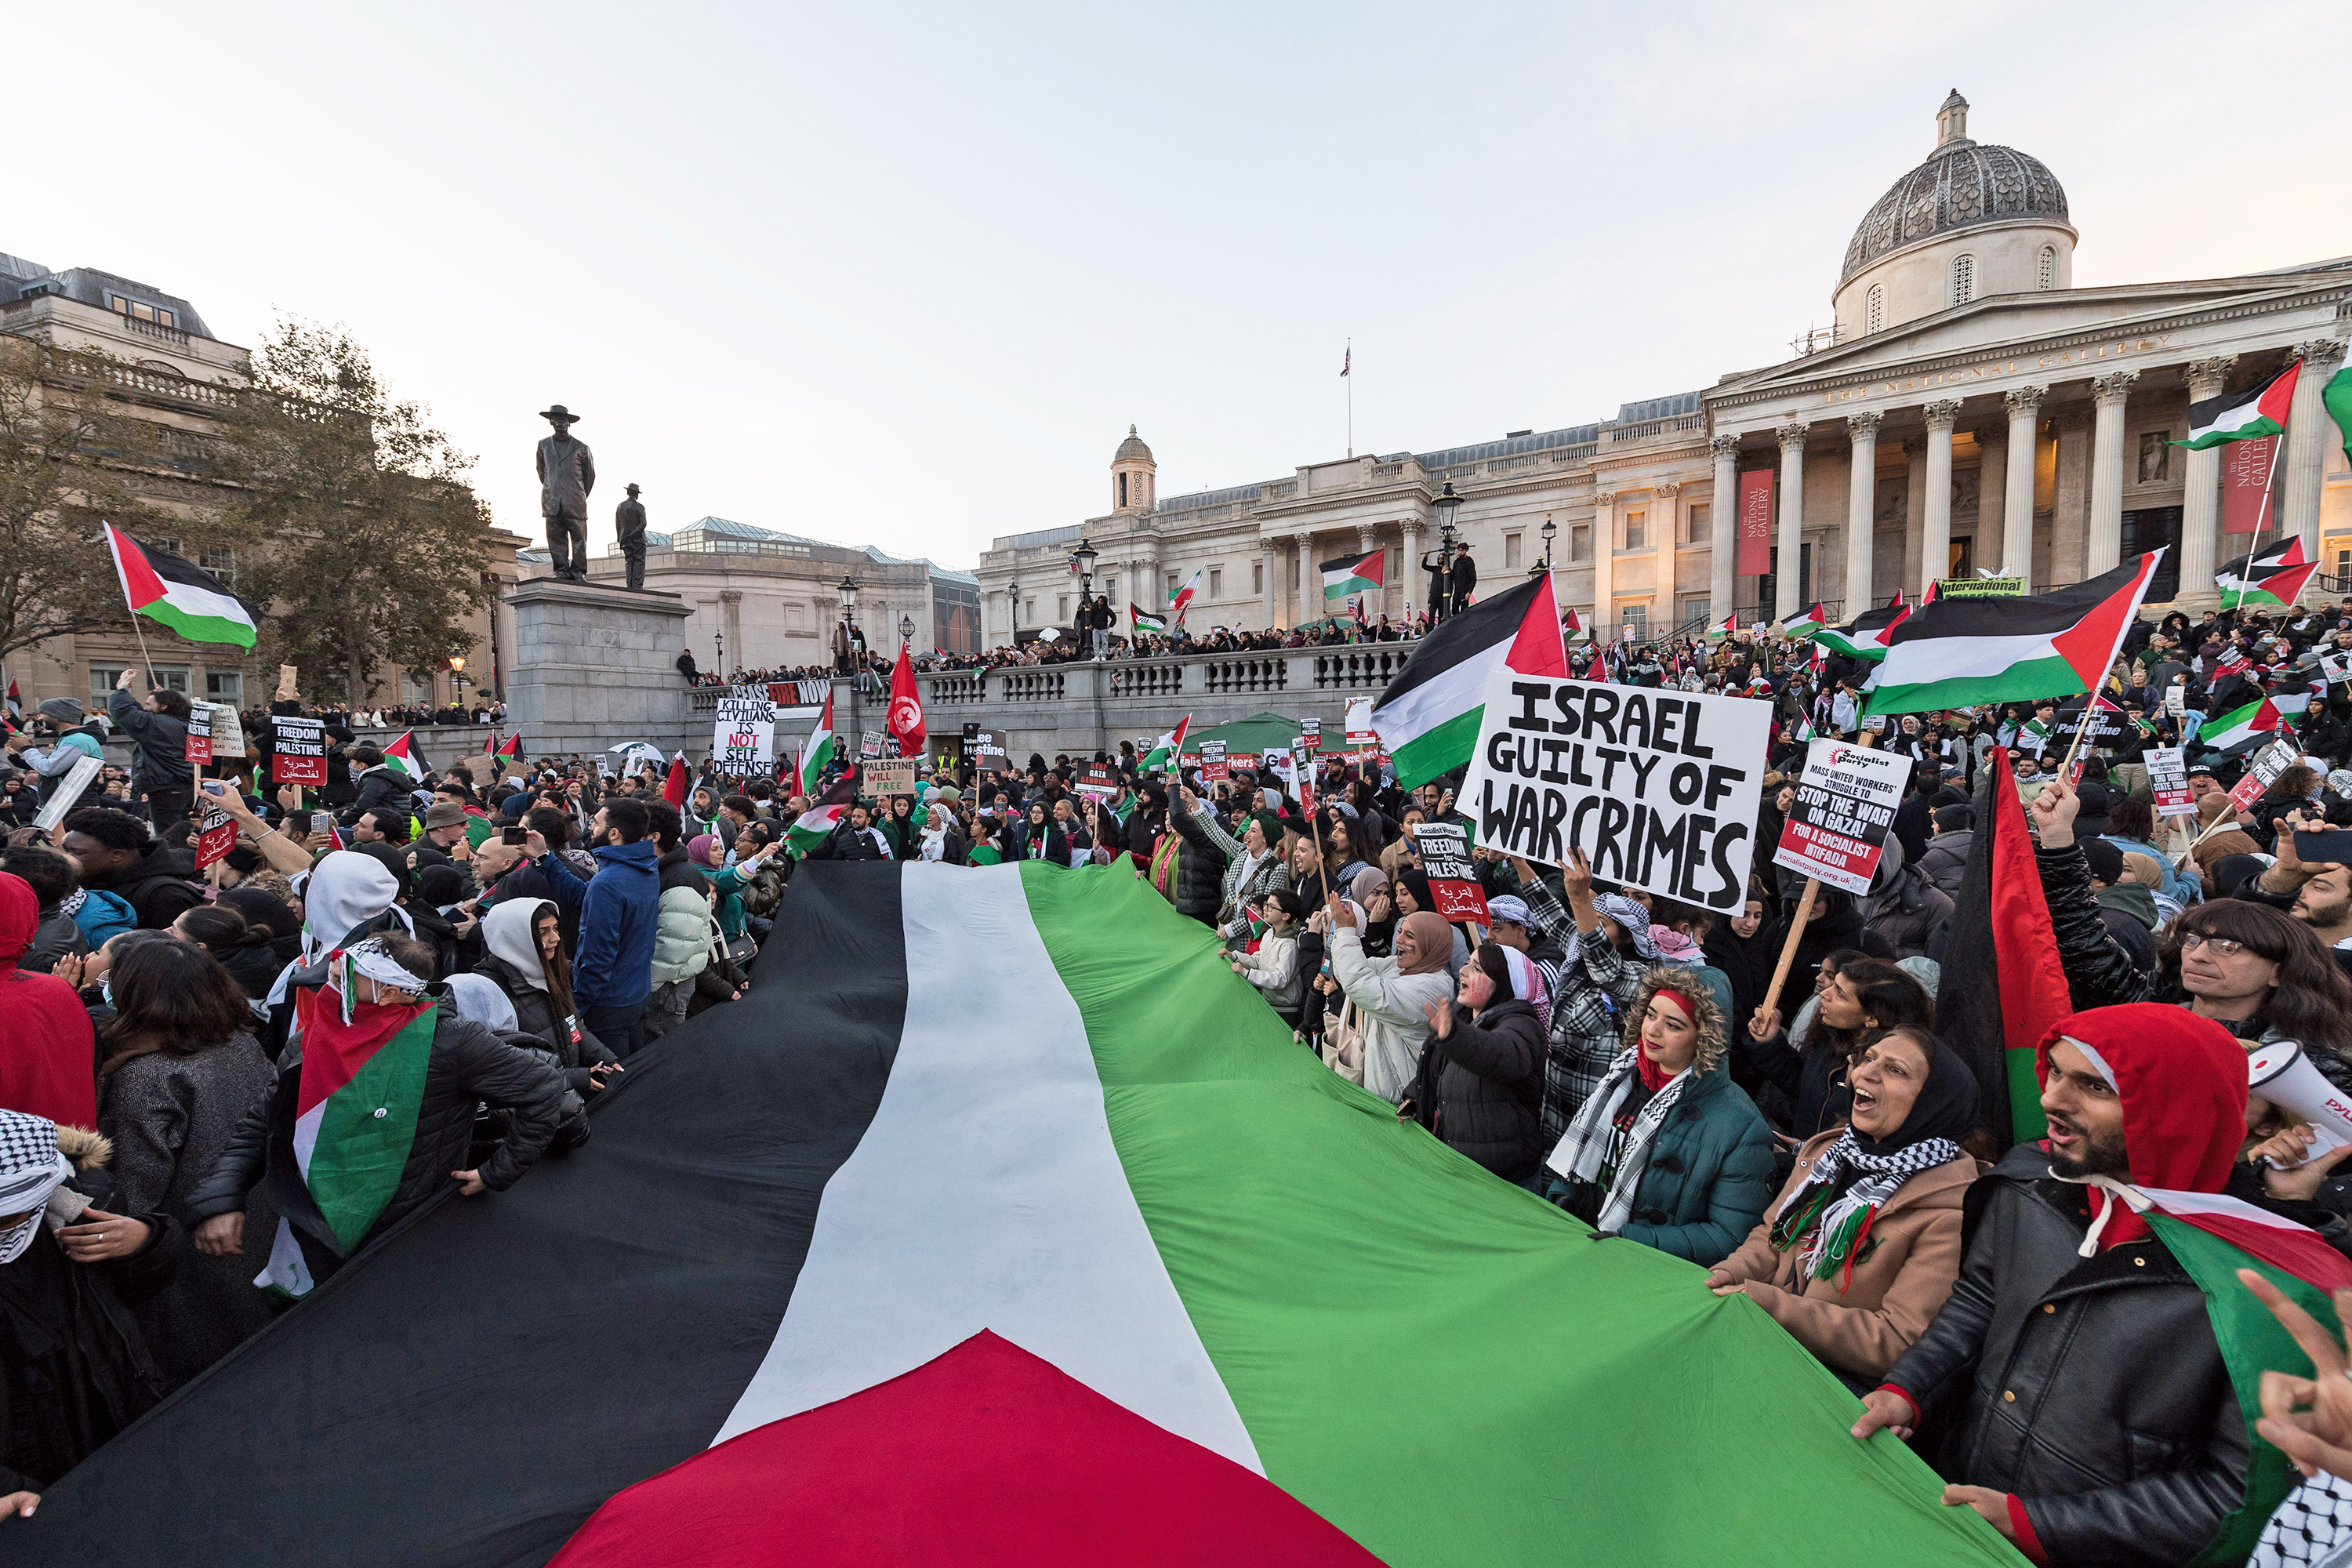 People gather as they carry Palestinian flags and banners to demonstrate solidarity with the Palestinians and demand an immediate ceasefire at Trafalgar Square in London, United Kingdom on November 4.